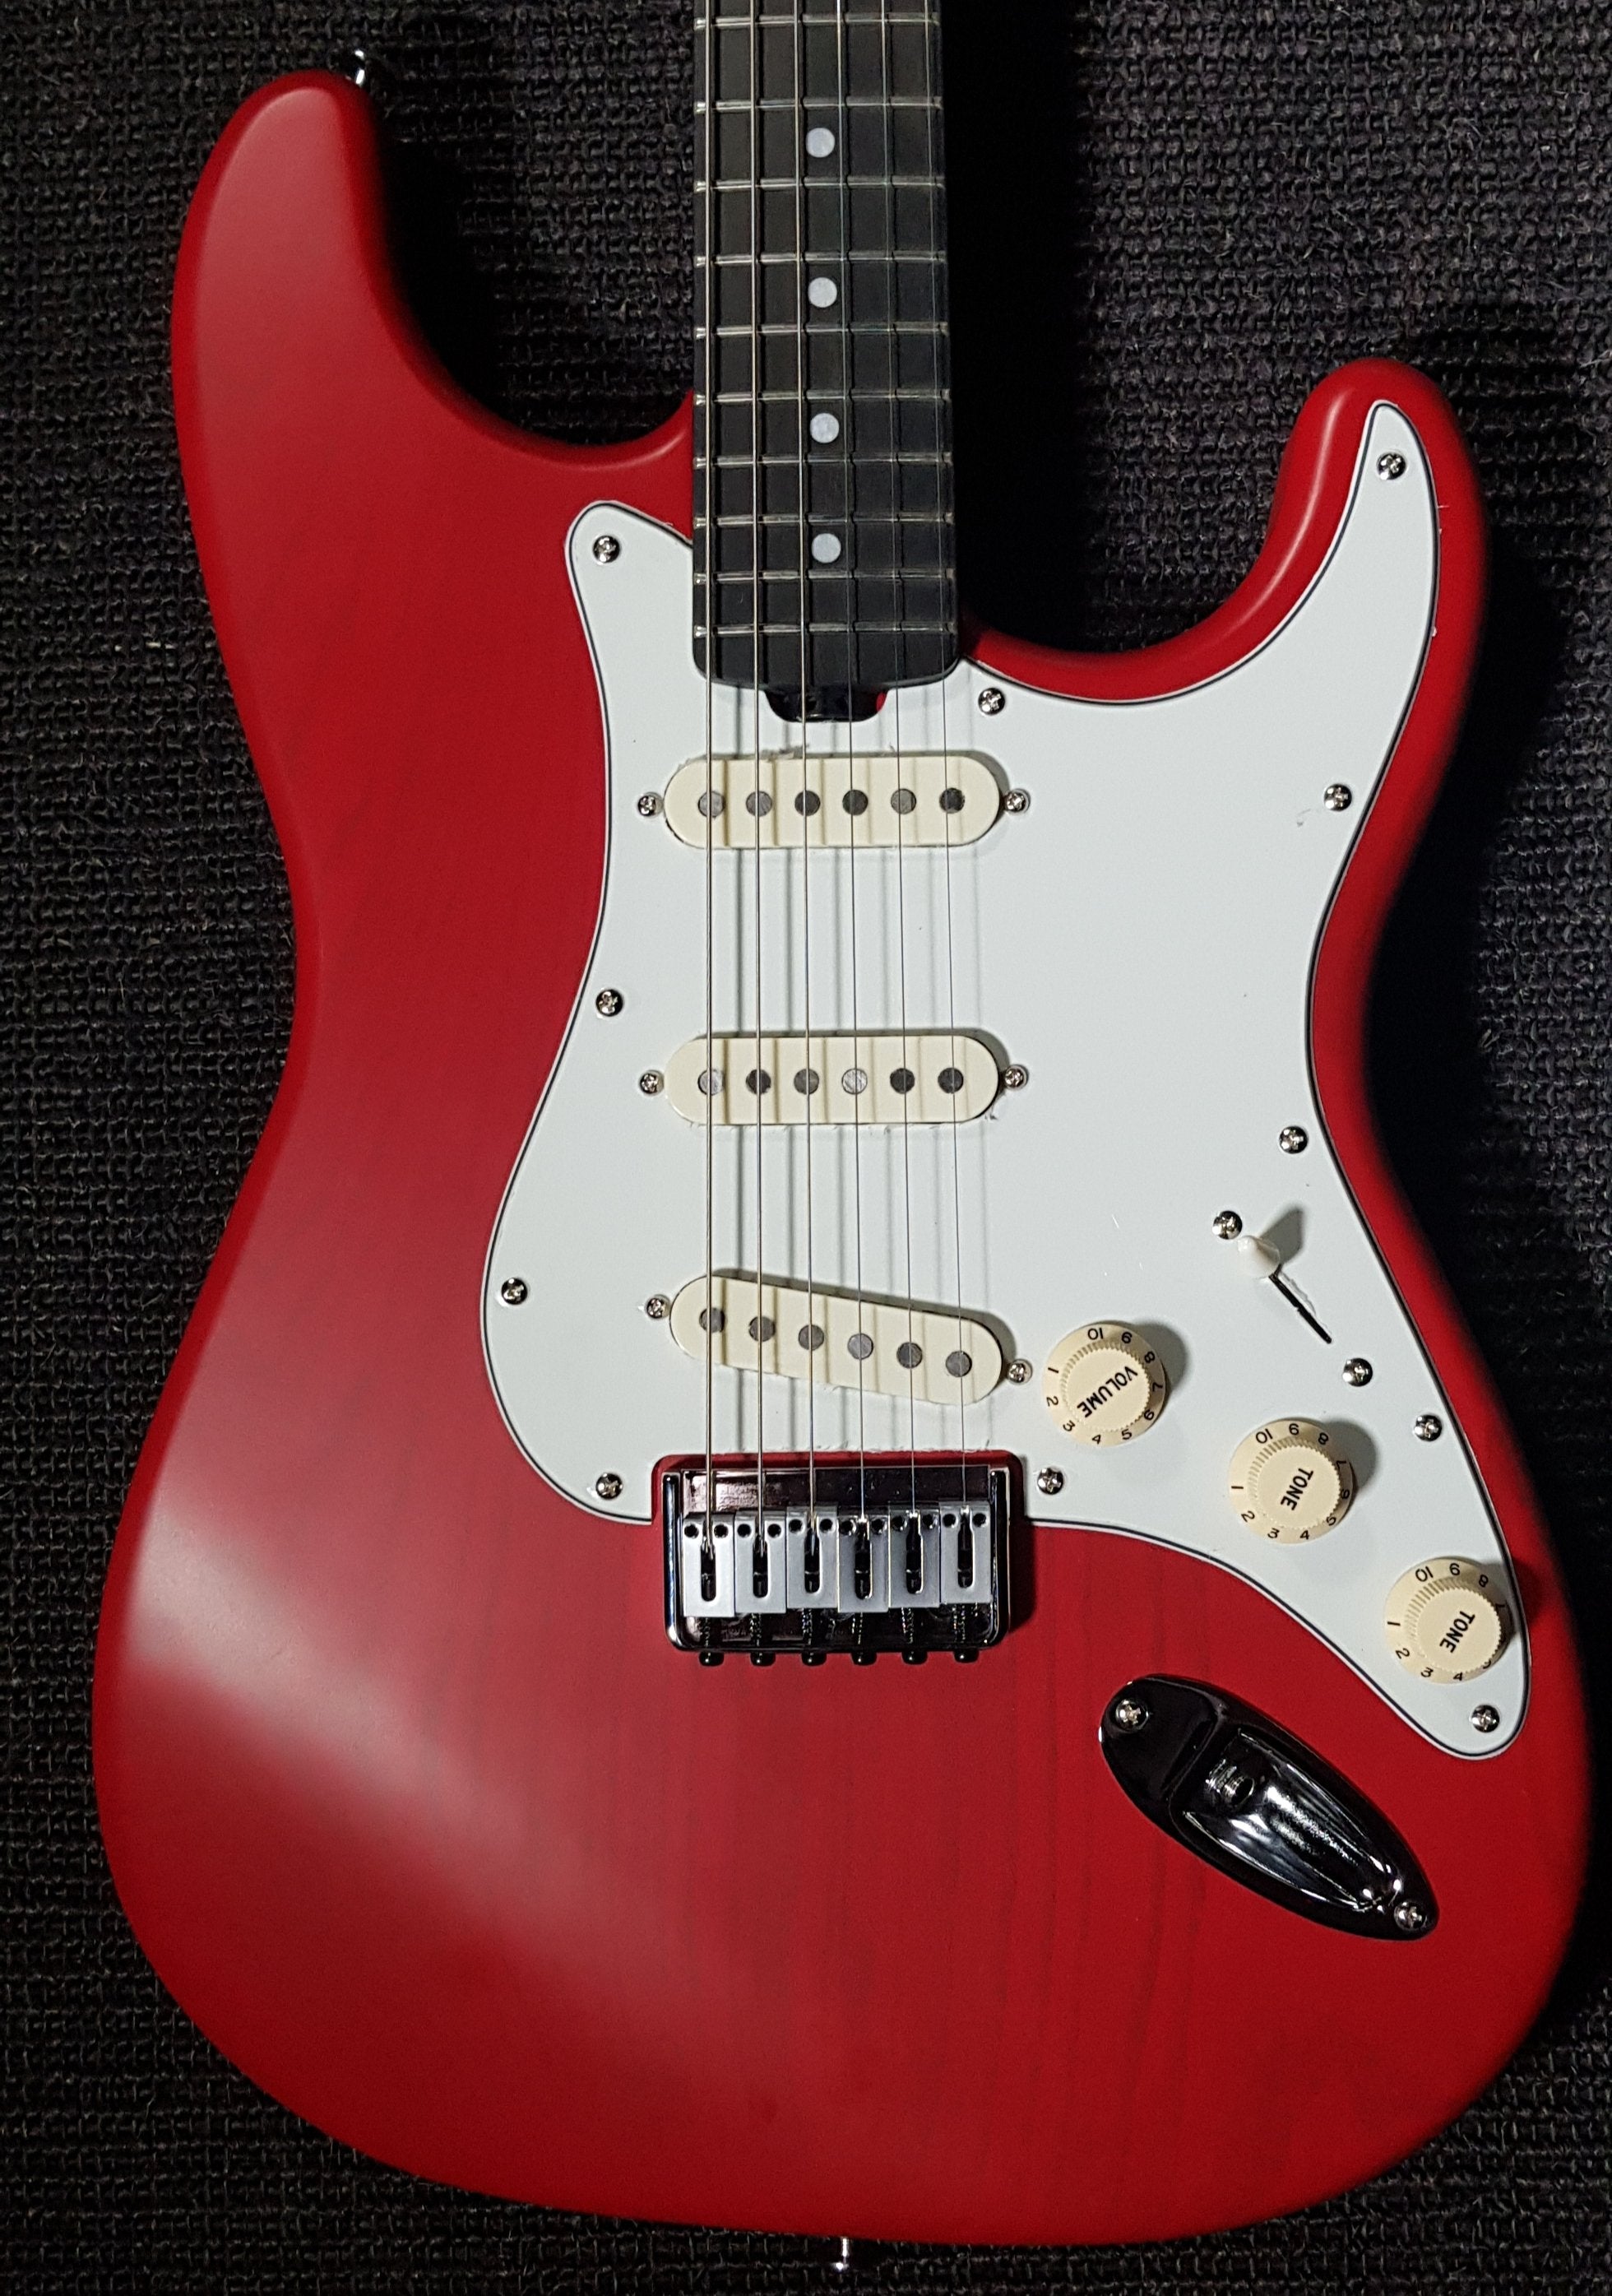 Gordon Smith - Chris Buck Classic S - Trans Red, Electric Guitar for sale at Richards Guitars.